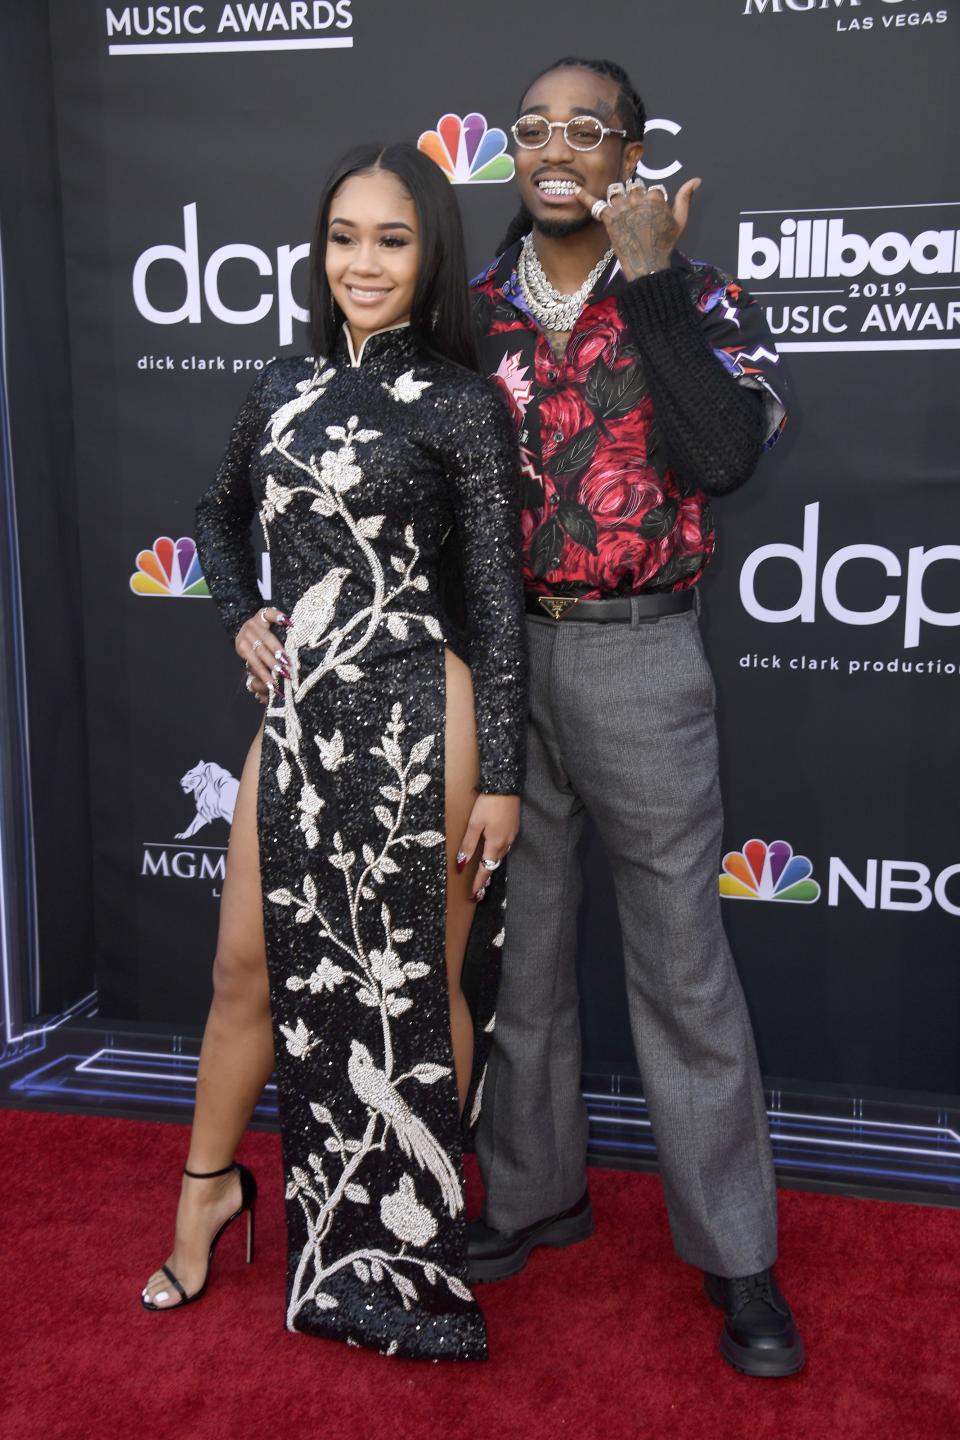 <h1 class="title">Saweetie and Quavo of Migos</h1><cite class="credit">Photo: Getty Images</cite>